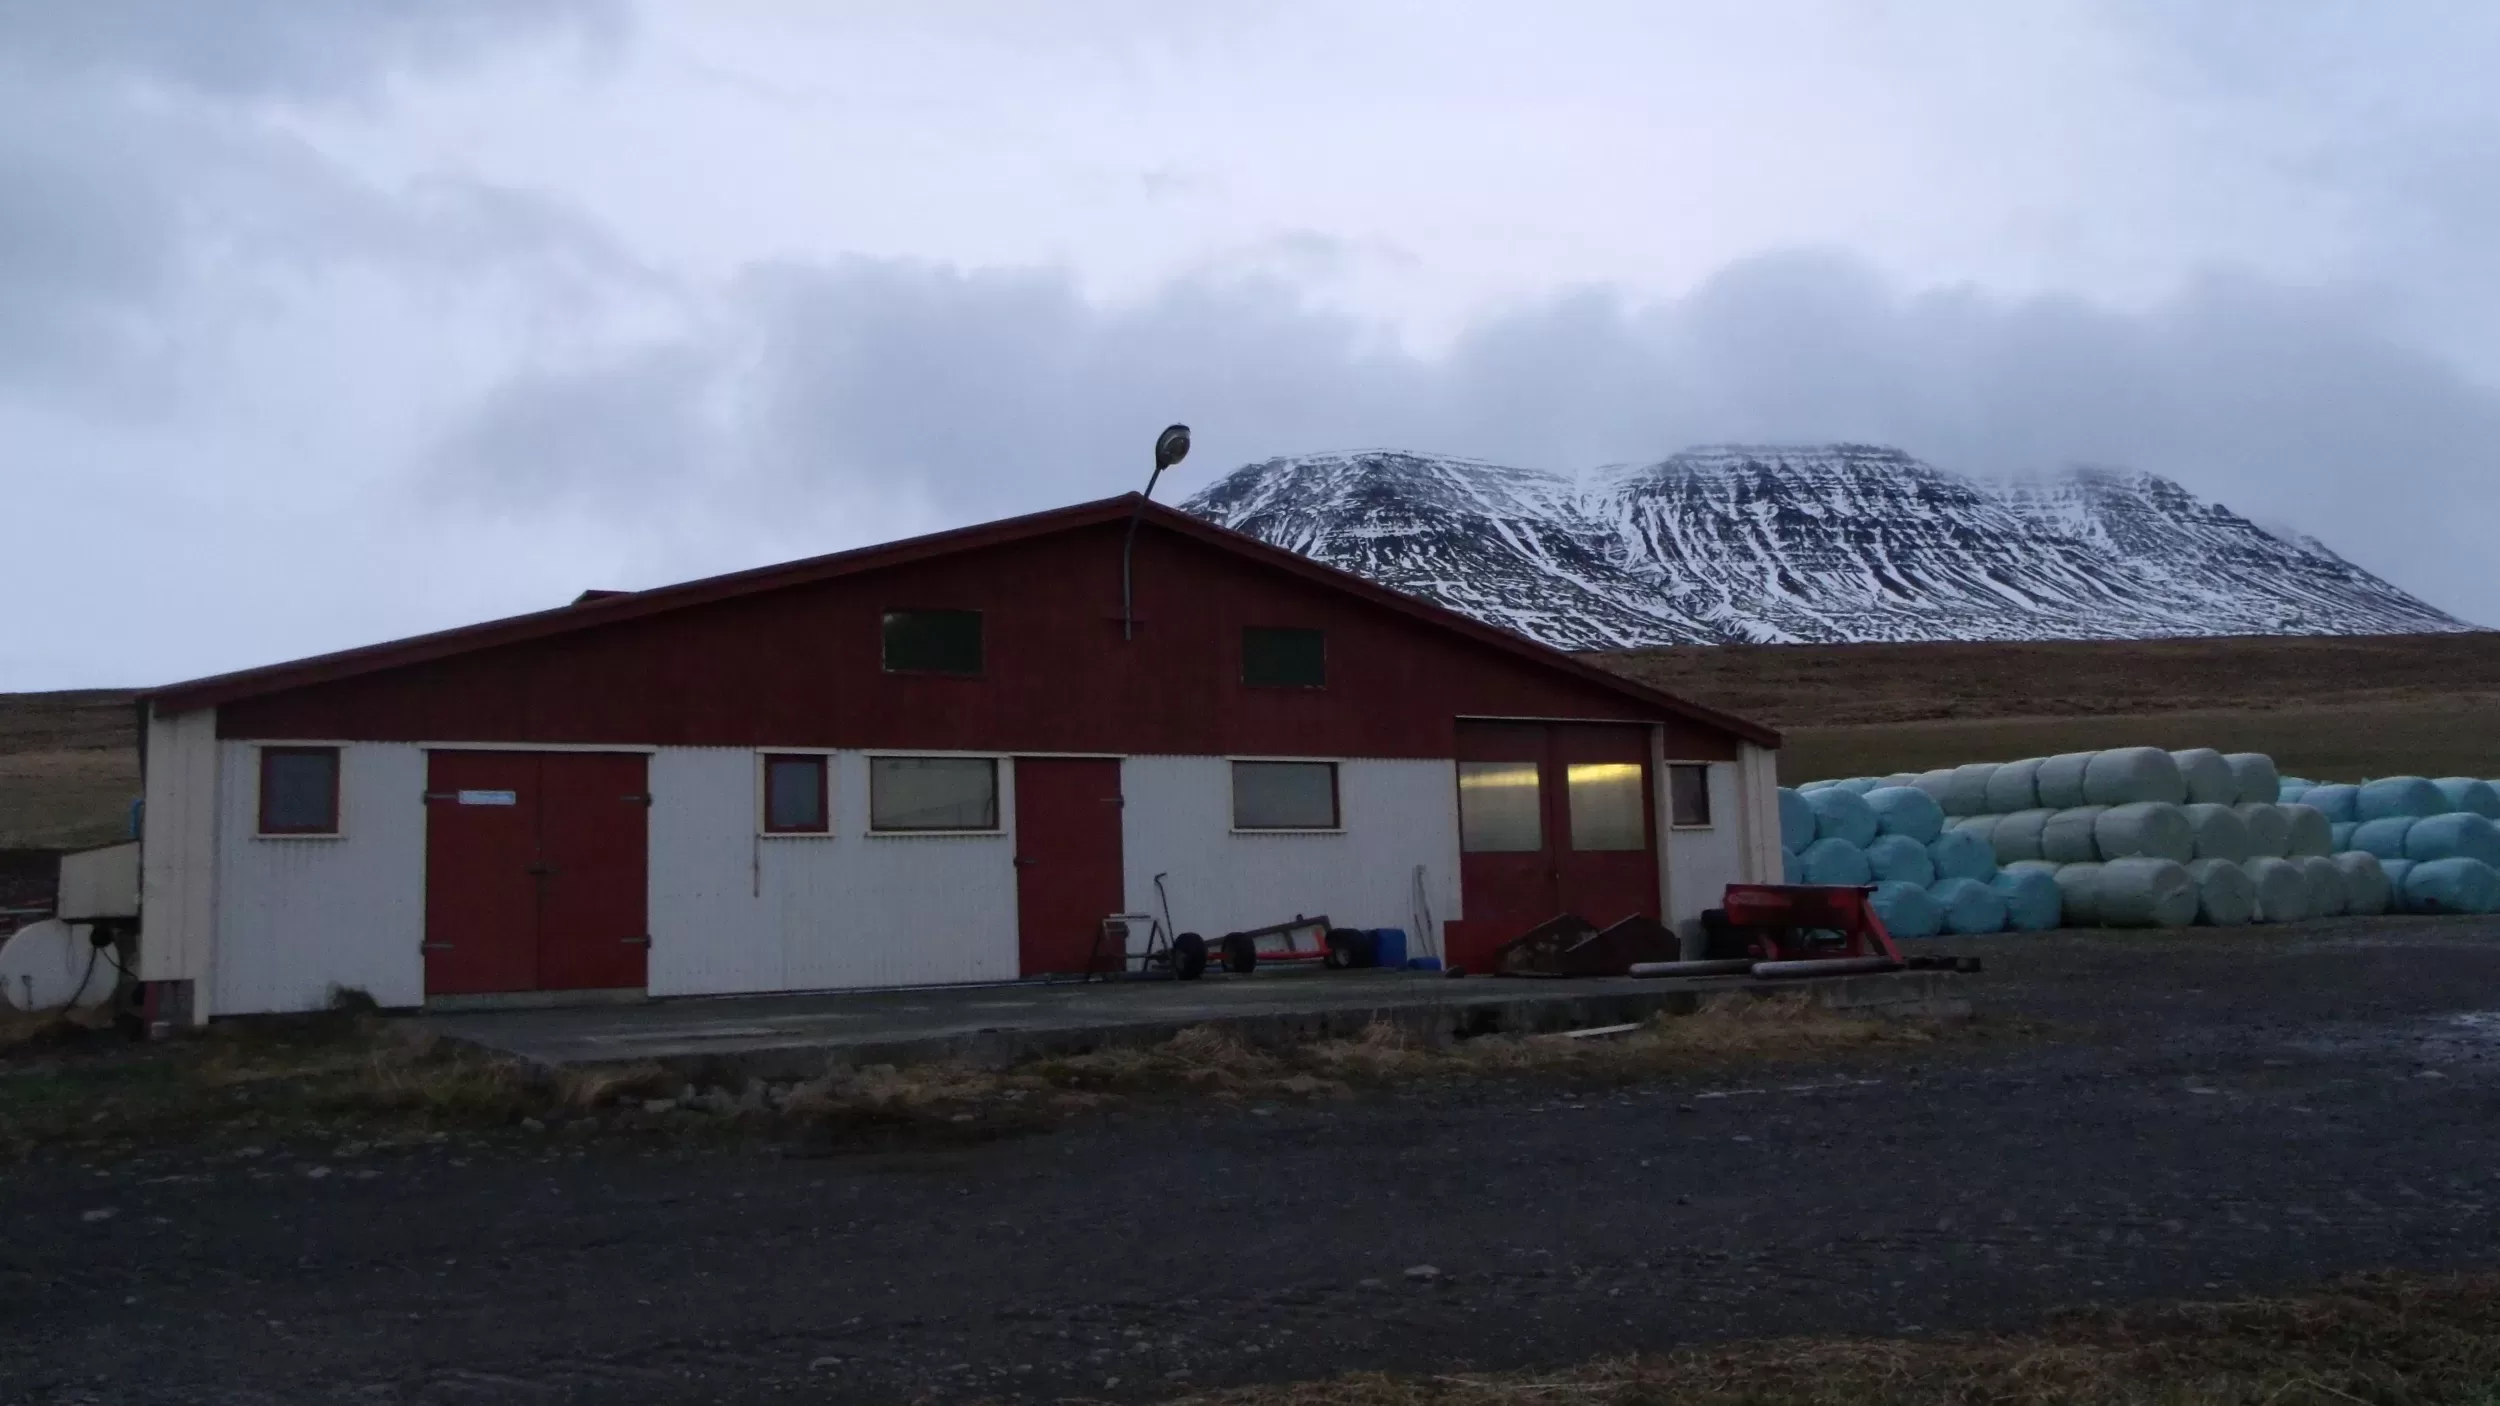 Icelandic farming has lessons for us all